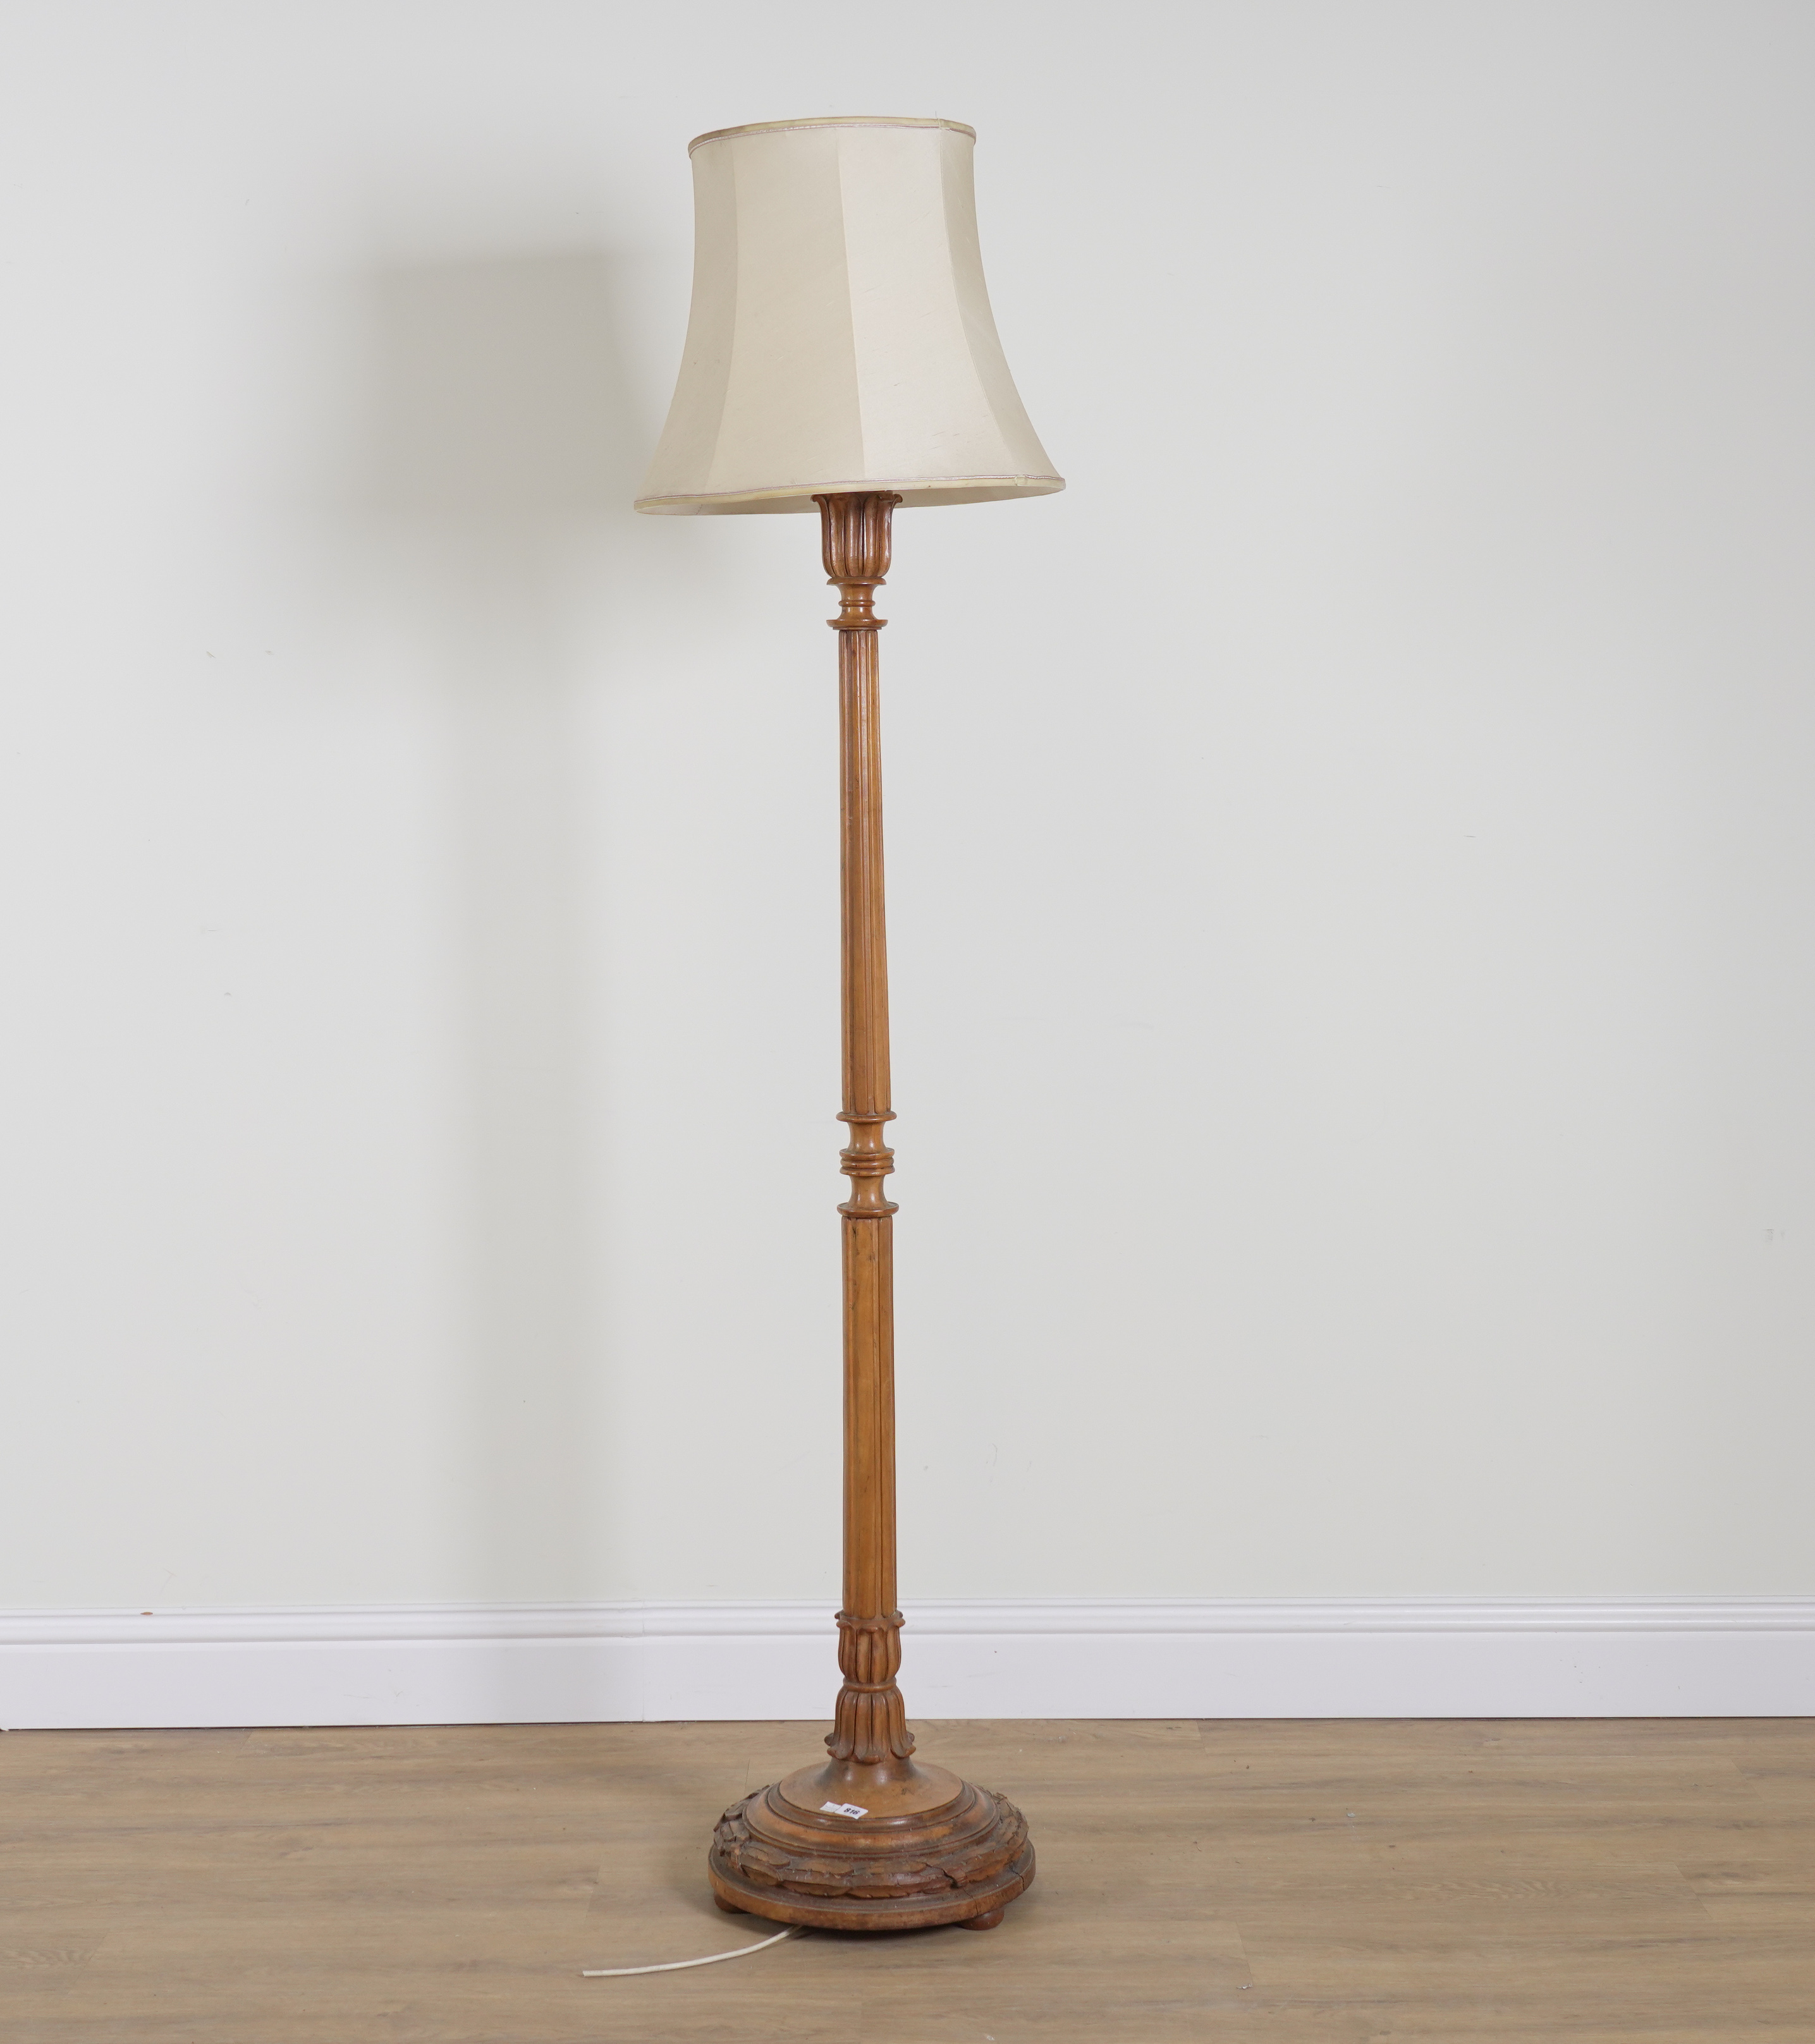 AN EARLY 20TH CENTURY FRENCH CARVED WALNUT STANDARD LAMP